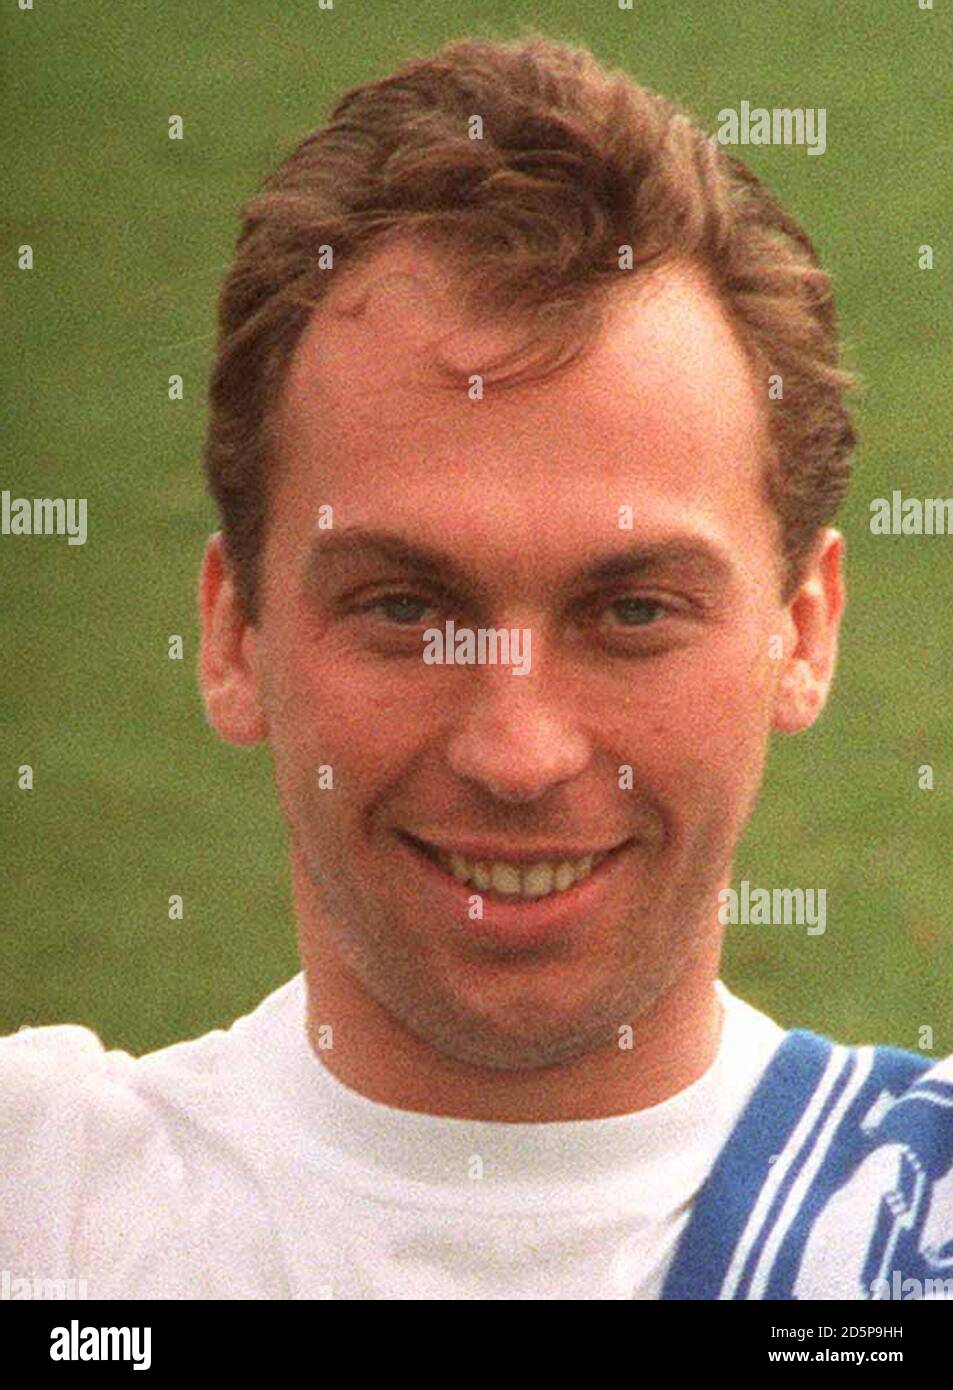 PAP LON 01 9.6.95. Library file 258221-6, dated 7.3.94. Footballer David Platt, who celebrates  his 29th birthday on Saturday 10.6.95. Photo by Michael Stephens/PA Stock Photo